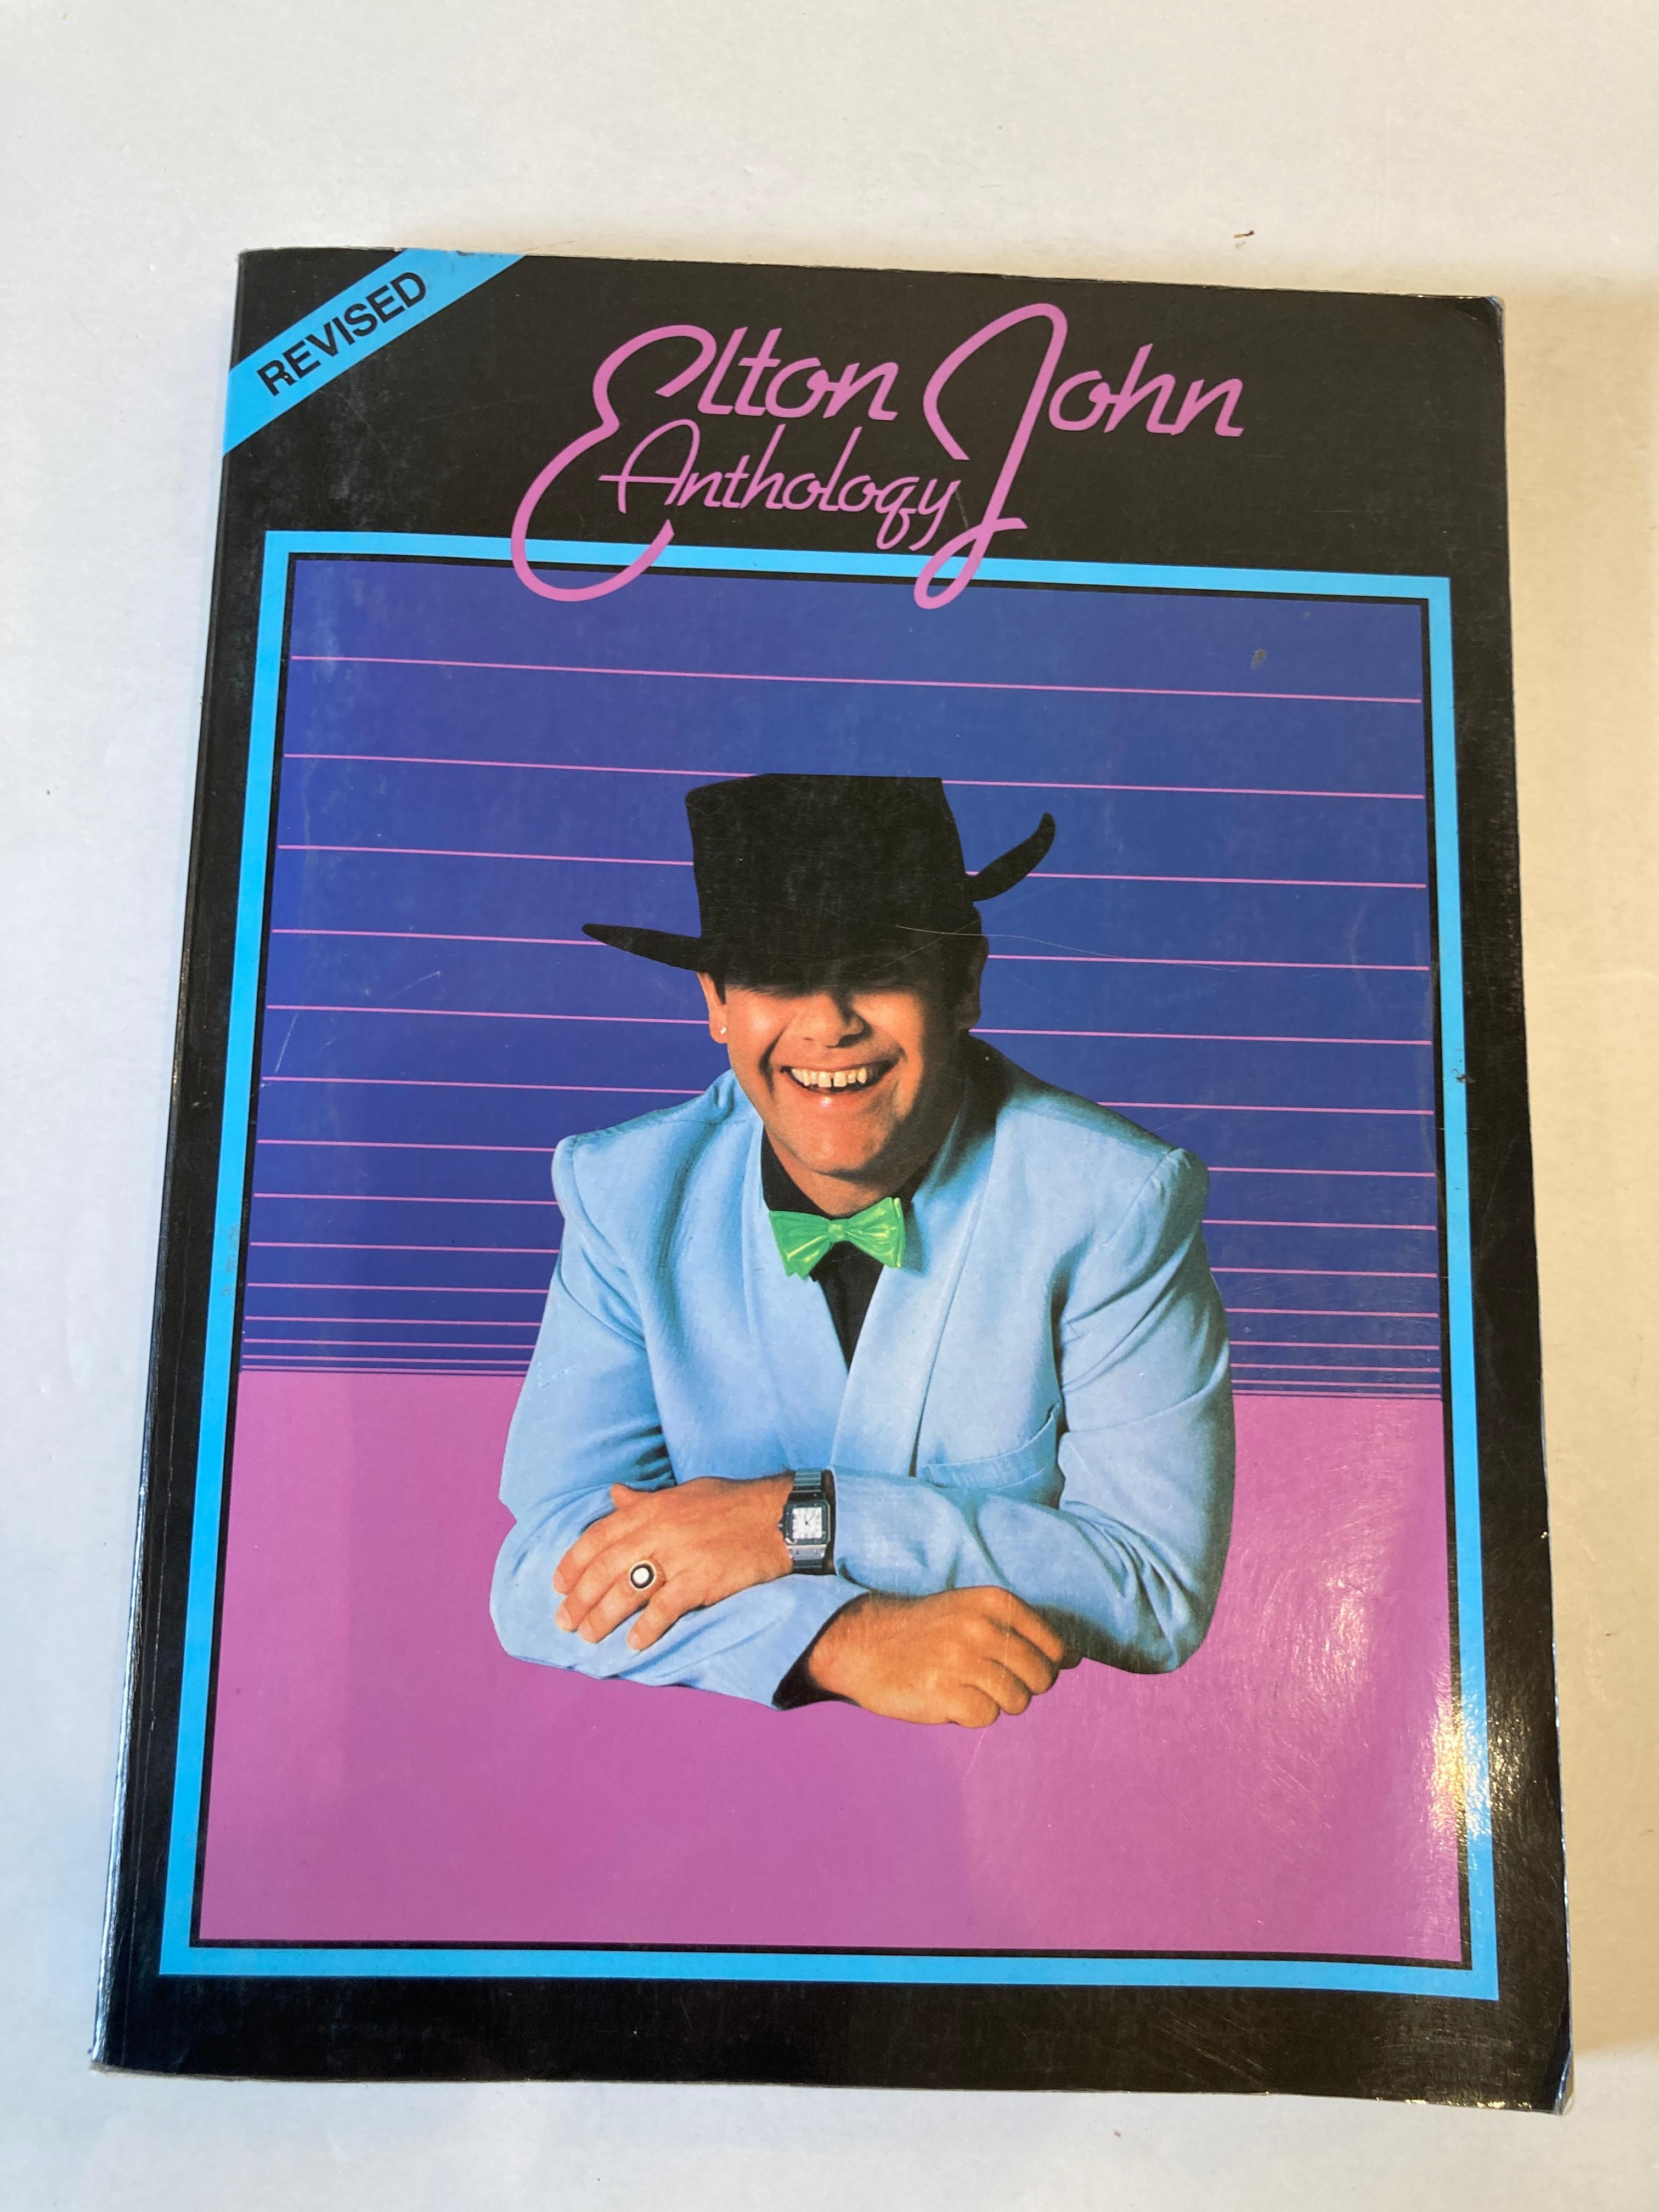 Elton John Anthology, Piano, Vocal, Guitar By John, Elton First published in 1969
Title Elton John Anthology. Piano, Vocal, Guitar.
Author John, Elton
Soft cover.
Book condition used - fine copy.
Reedition revised in 1982
Copyright 1969 Dick James